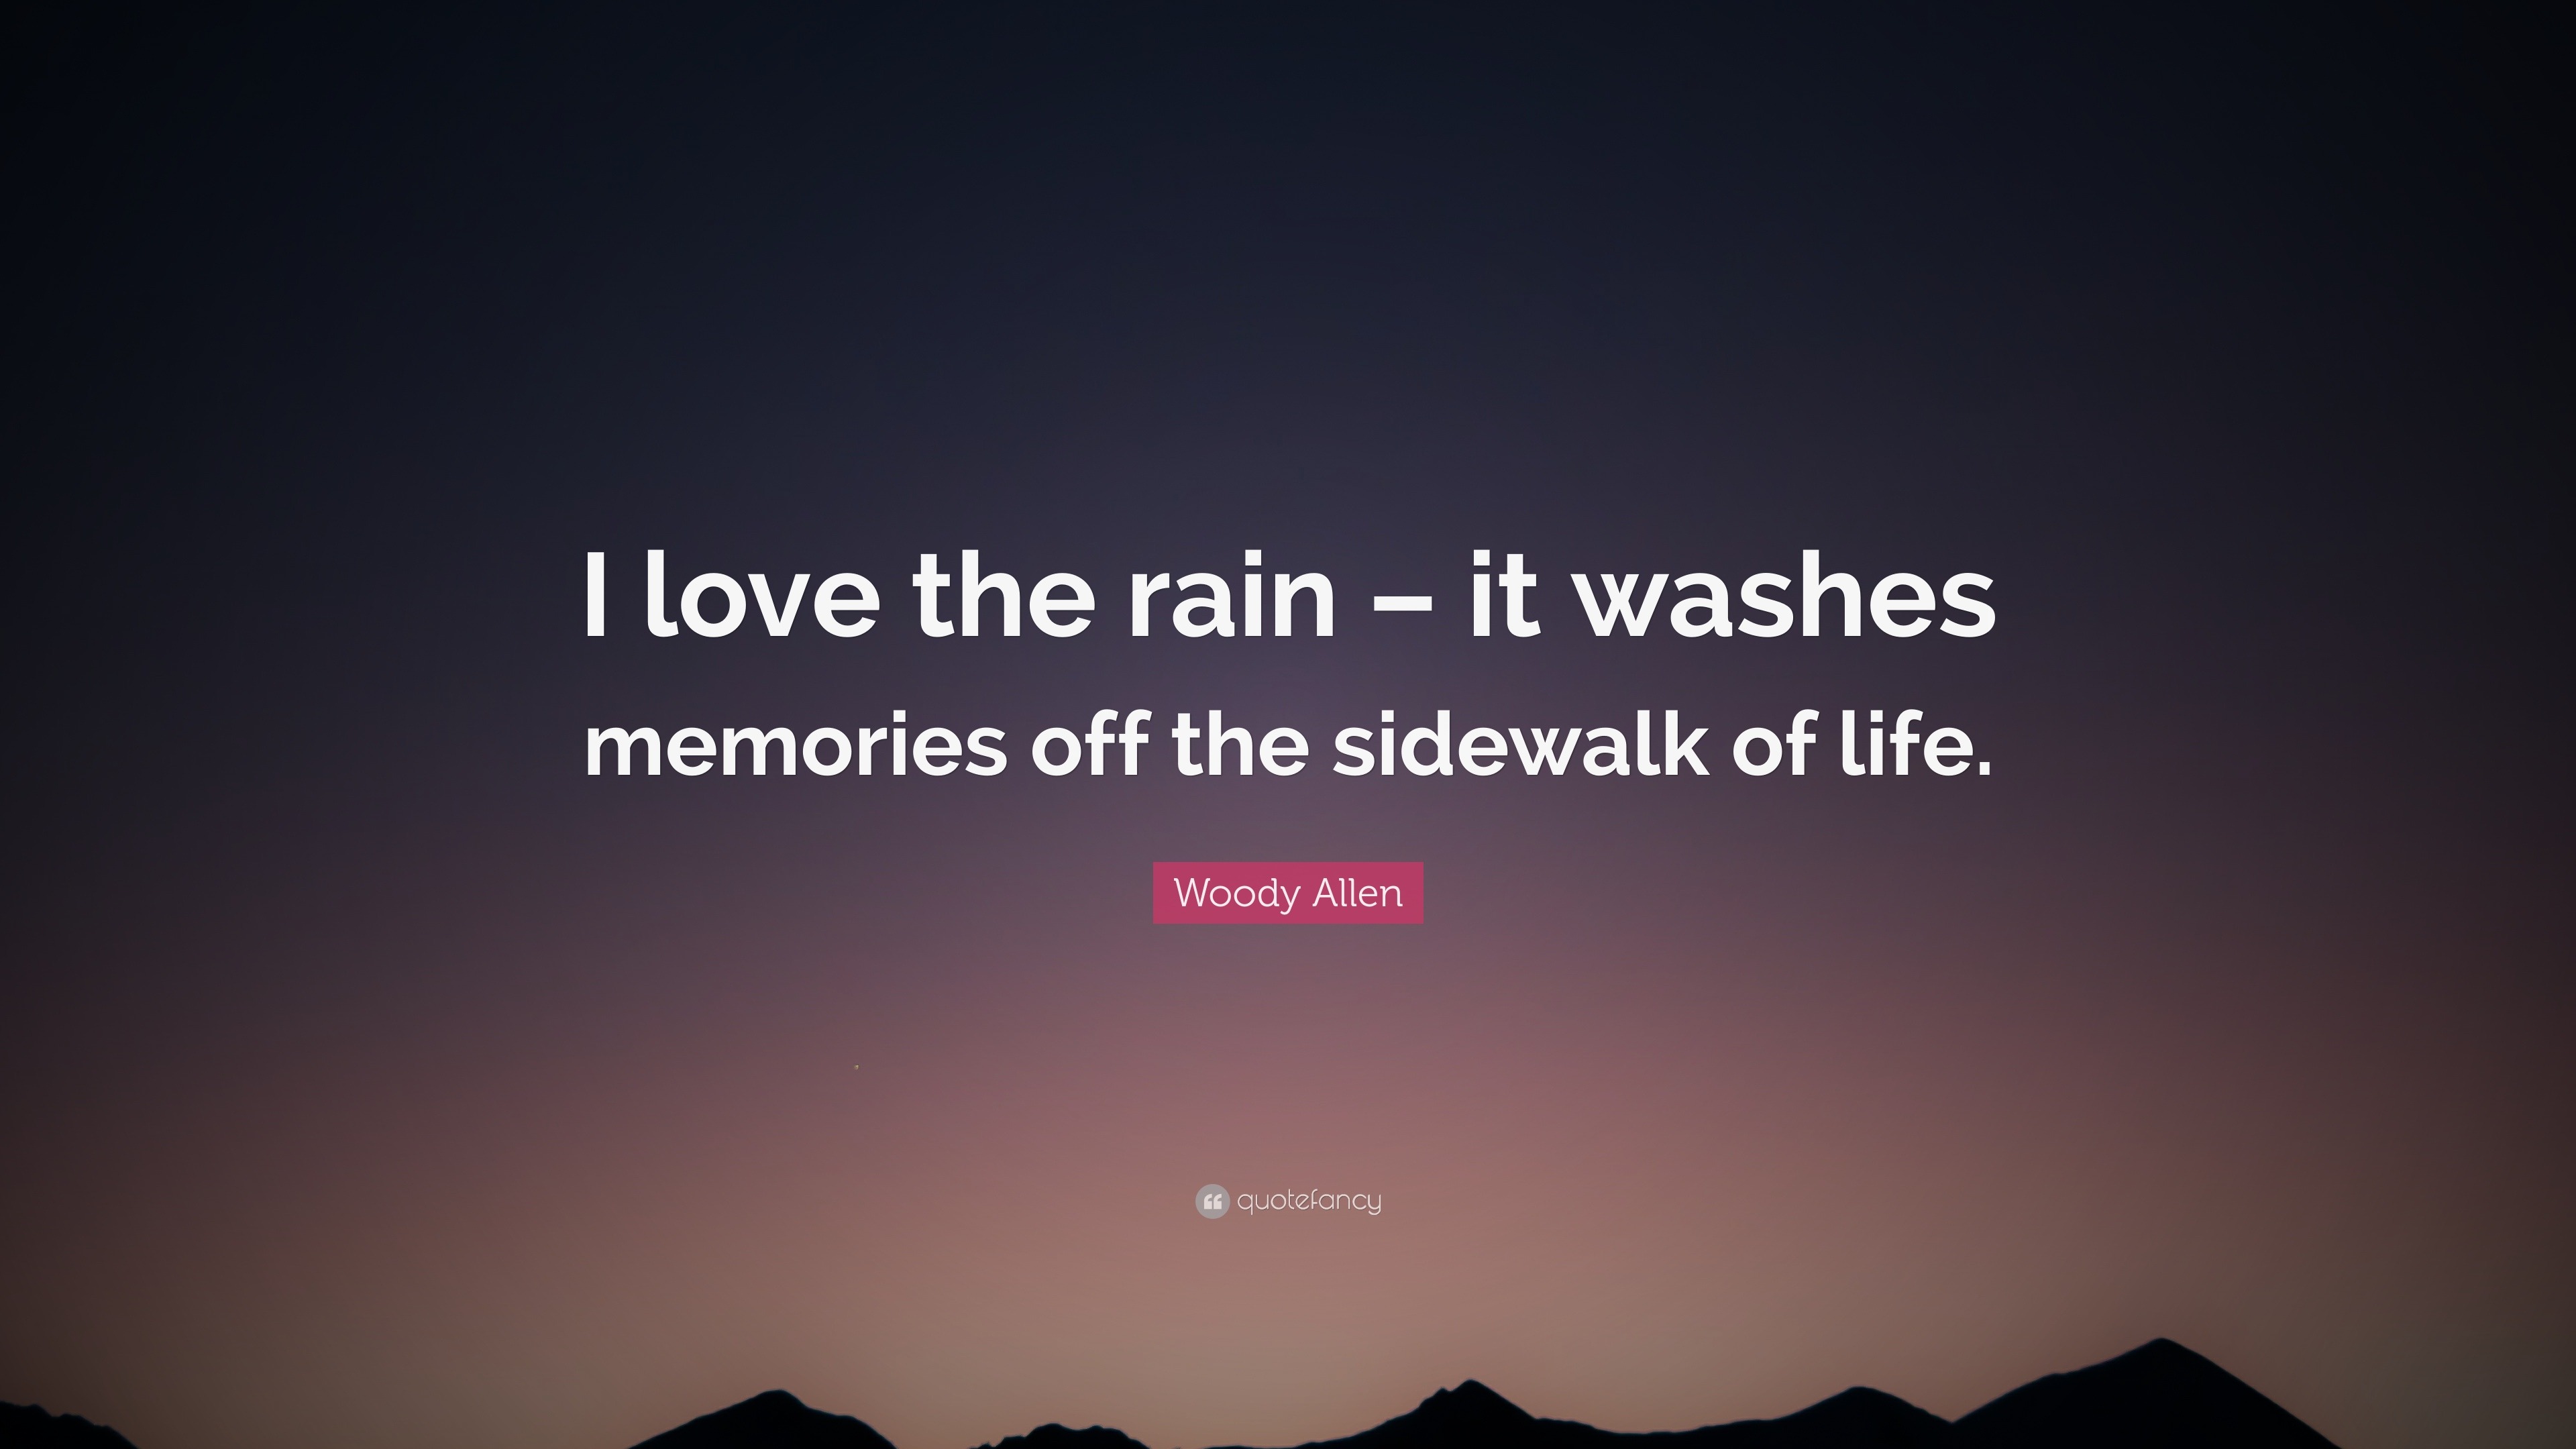 Woody Allen Quote “I love the rain – it washes memories off the sidewalk